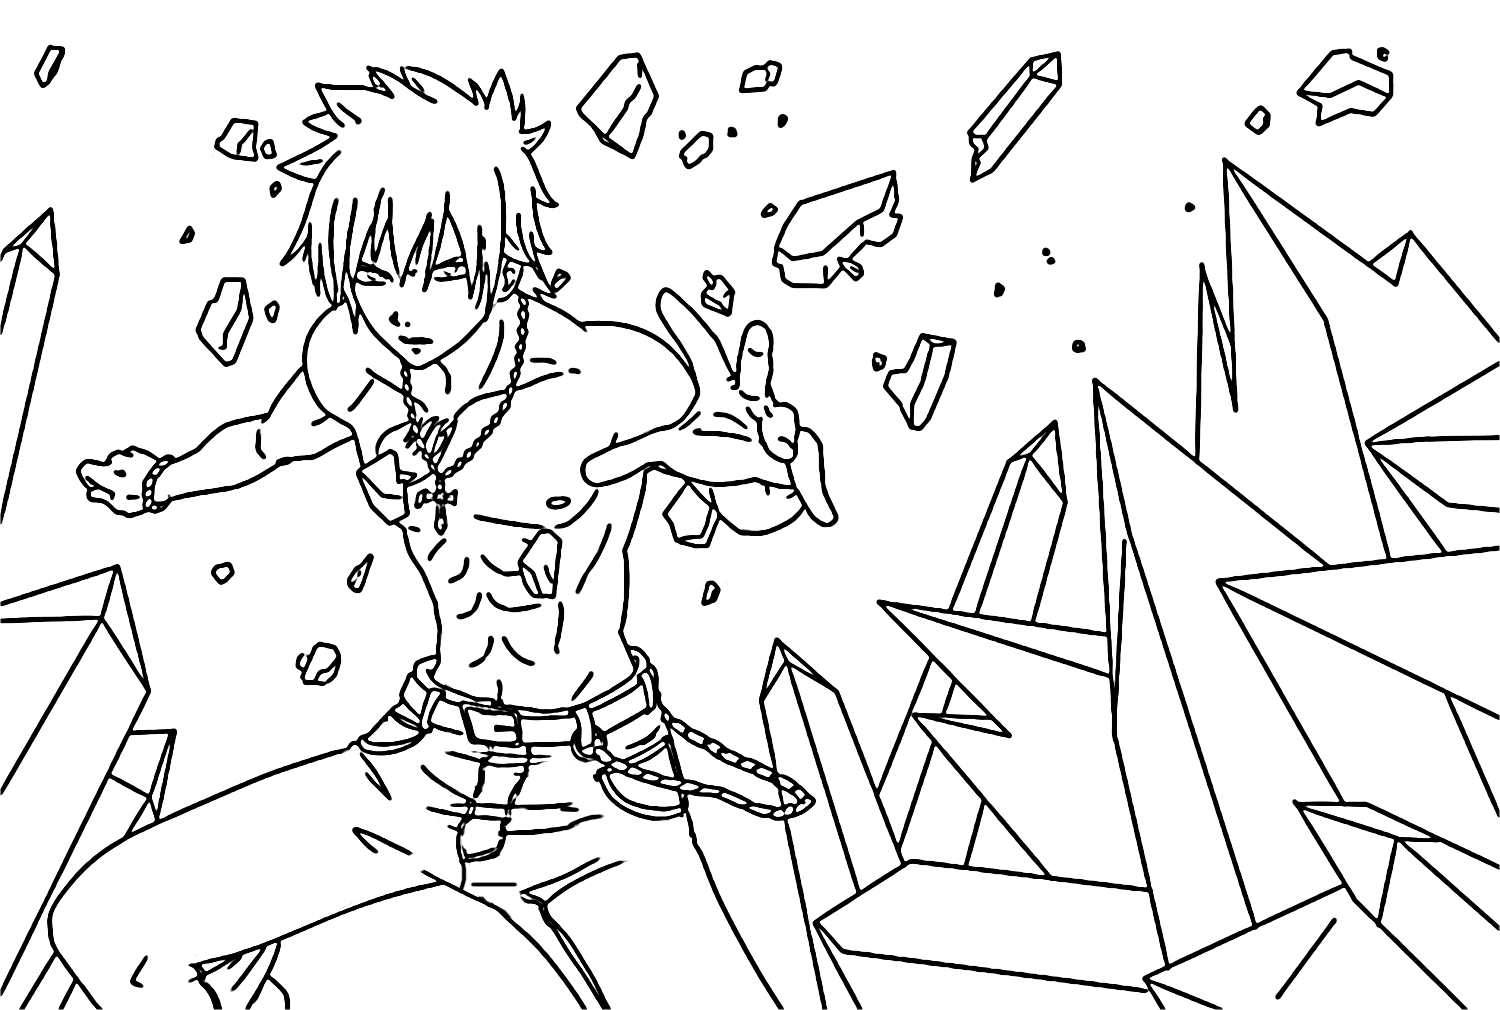 Gray Fullbuster from Fairy Tail Coloring Pages from Gray Fullbuster